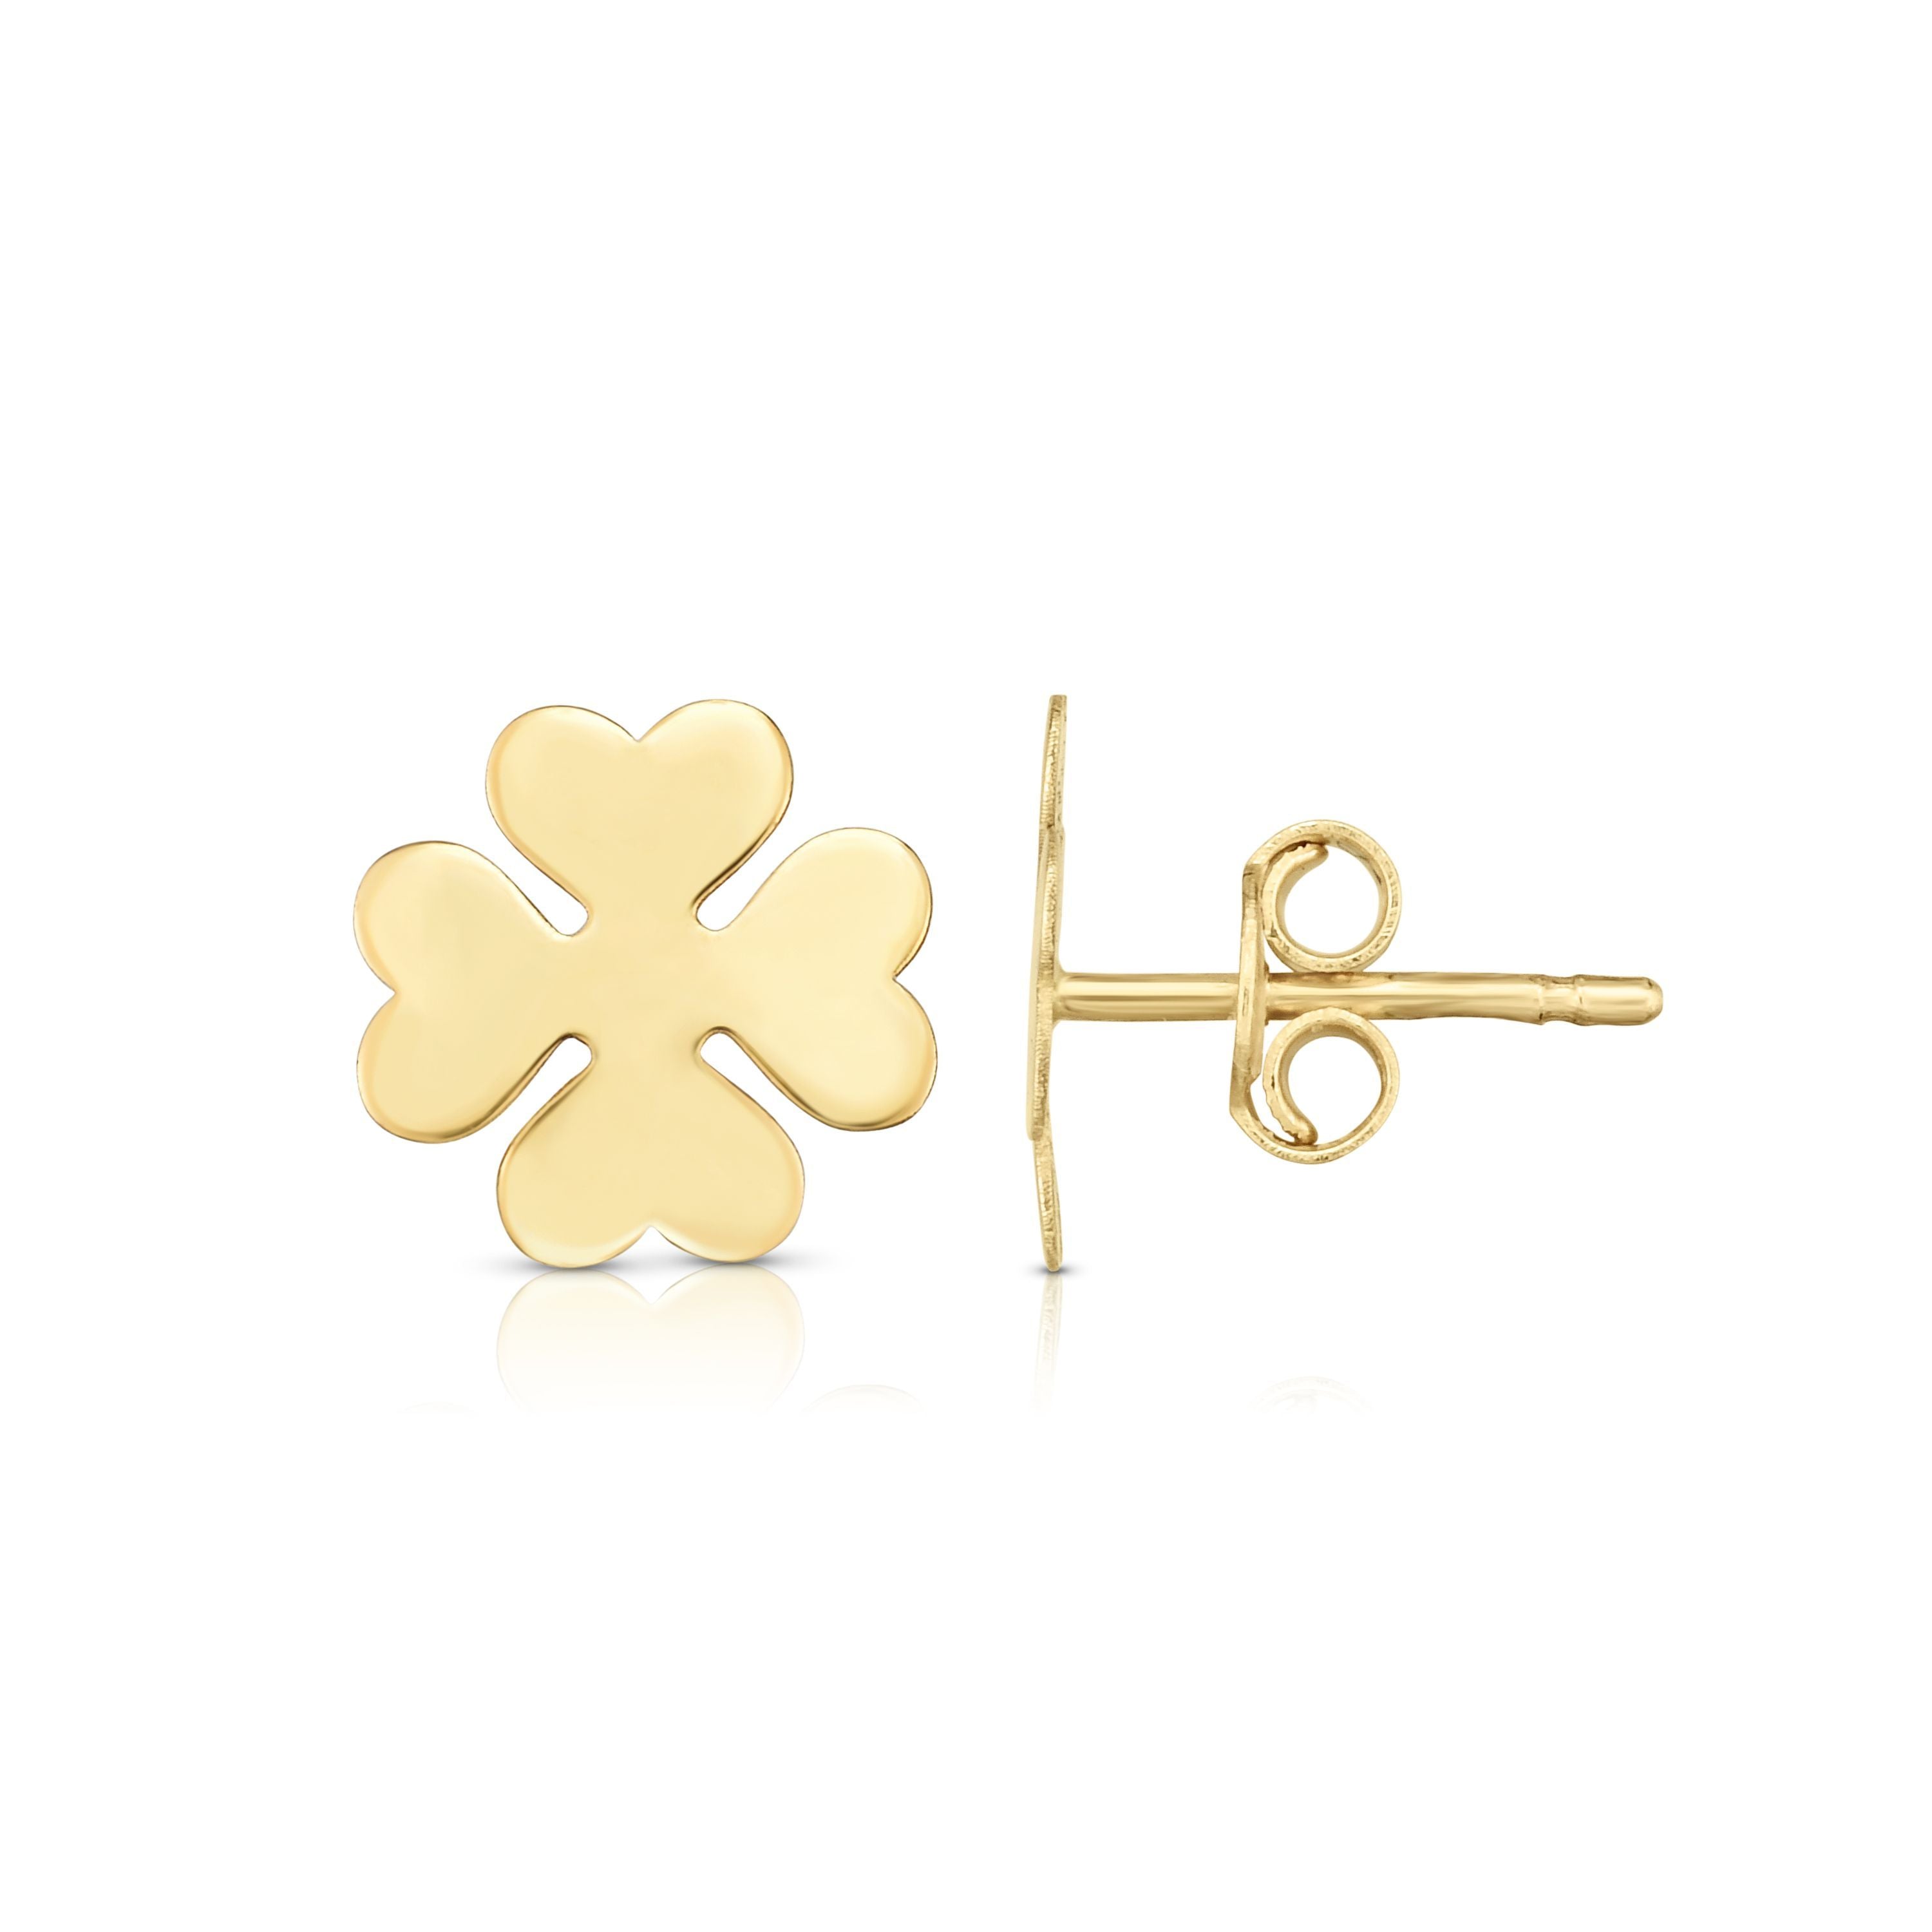 Polished Post Clover Earring with Push Back Clasp